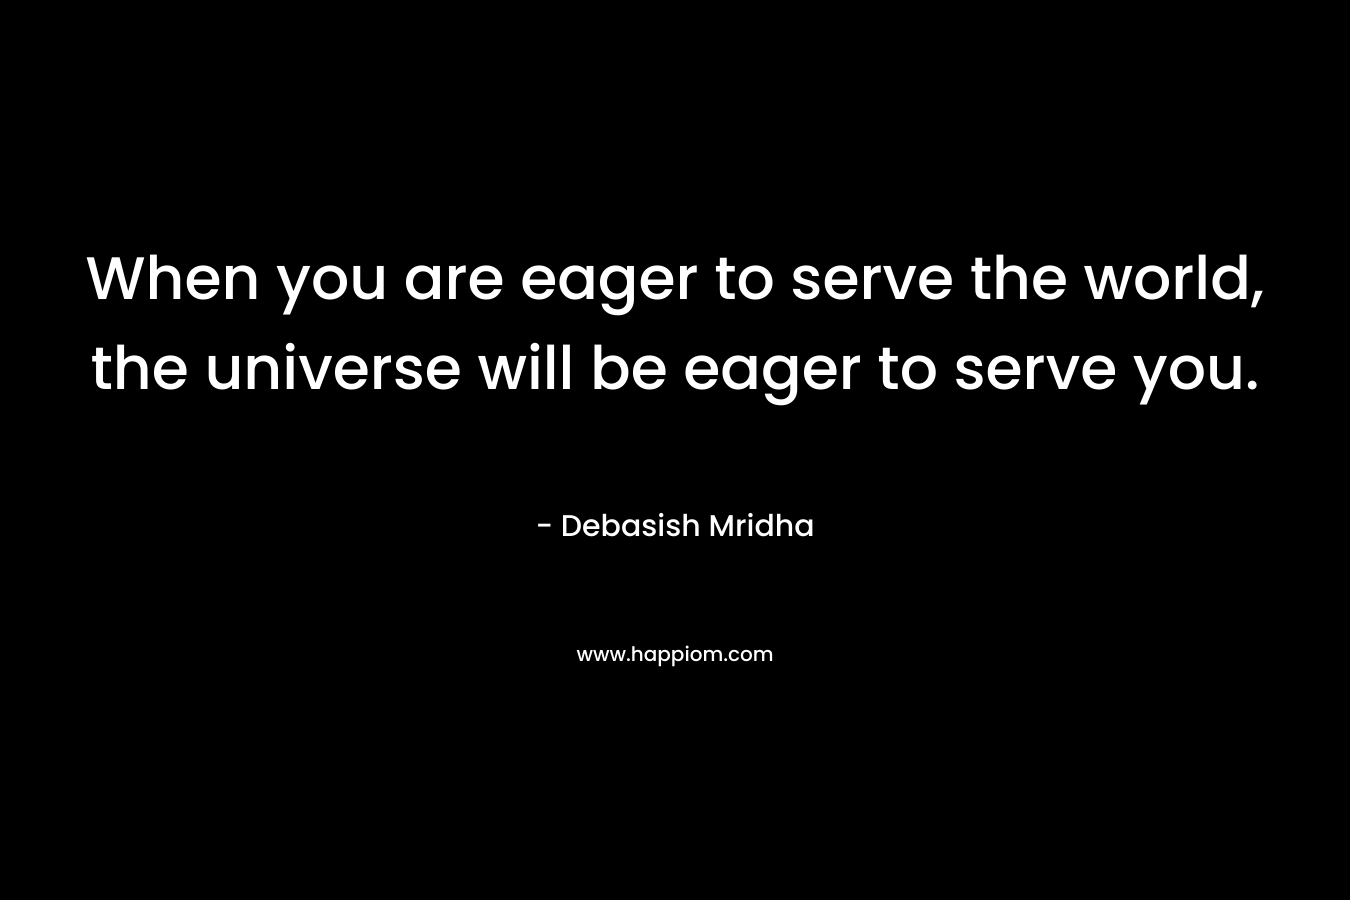 When you are eager to serve the world, the universe will be eager to serve you.